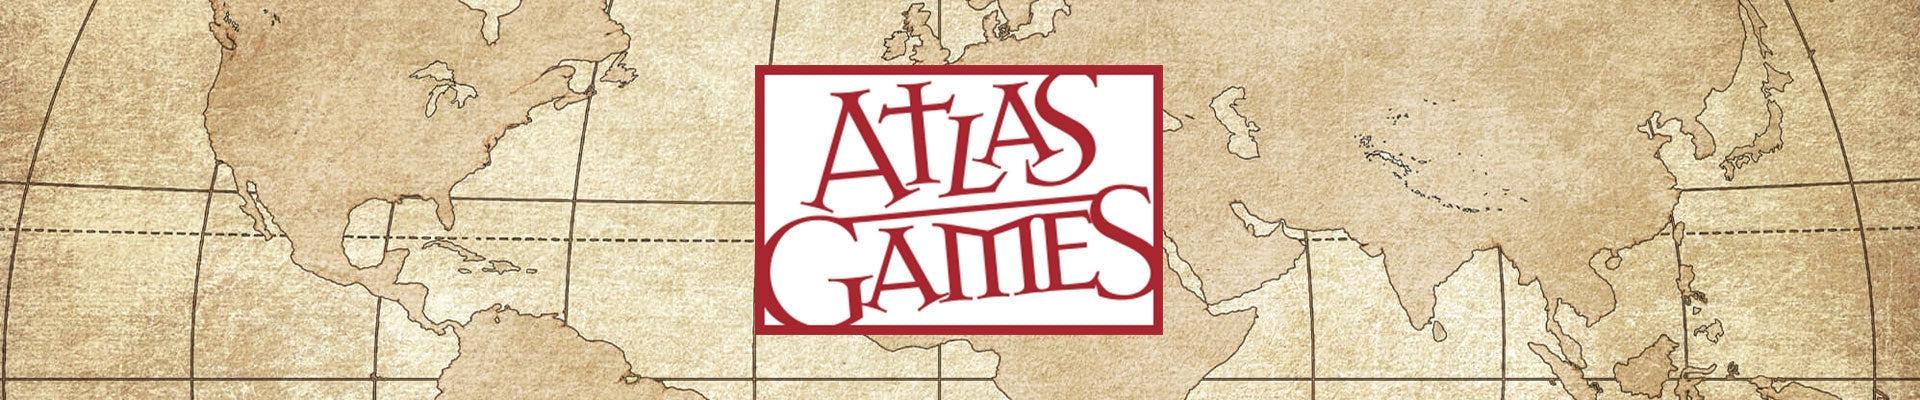 Atlas Games Store at Legacy Toys